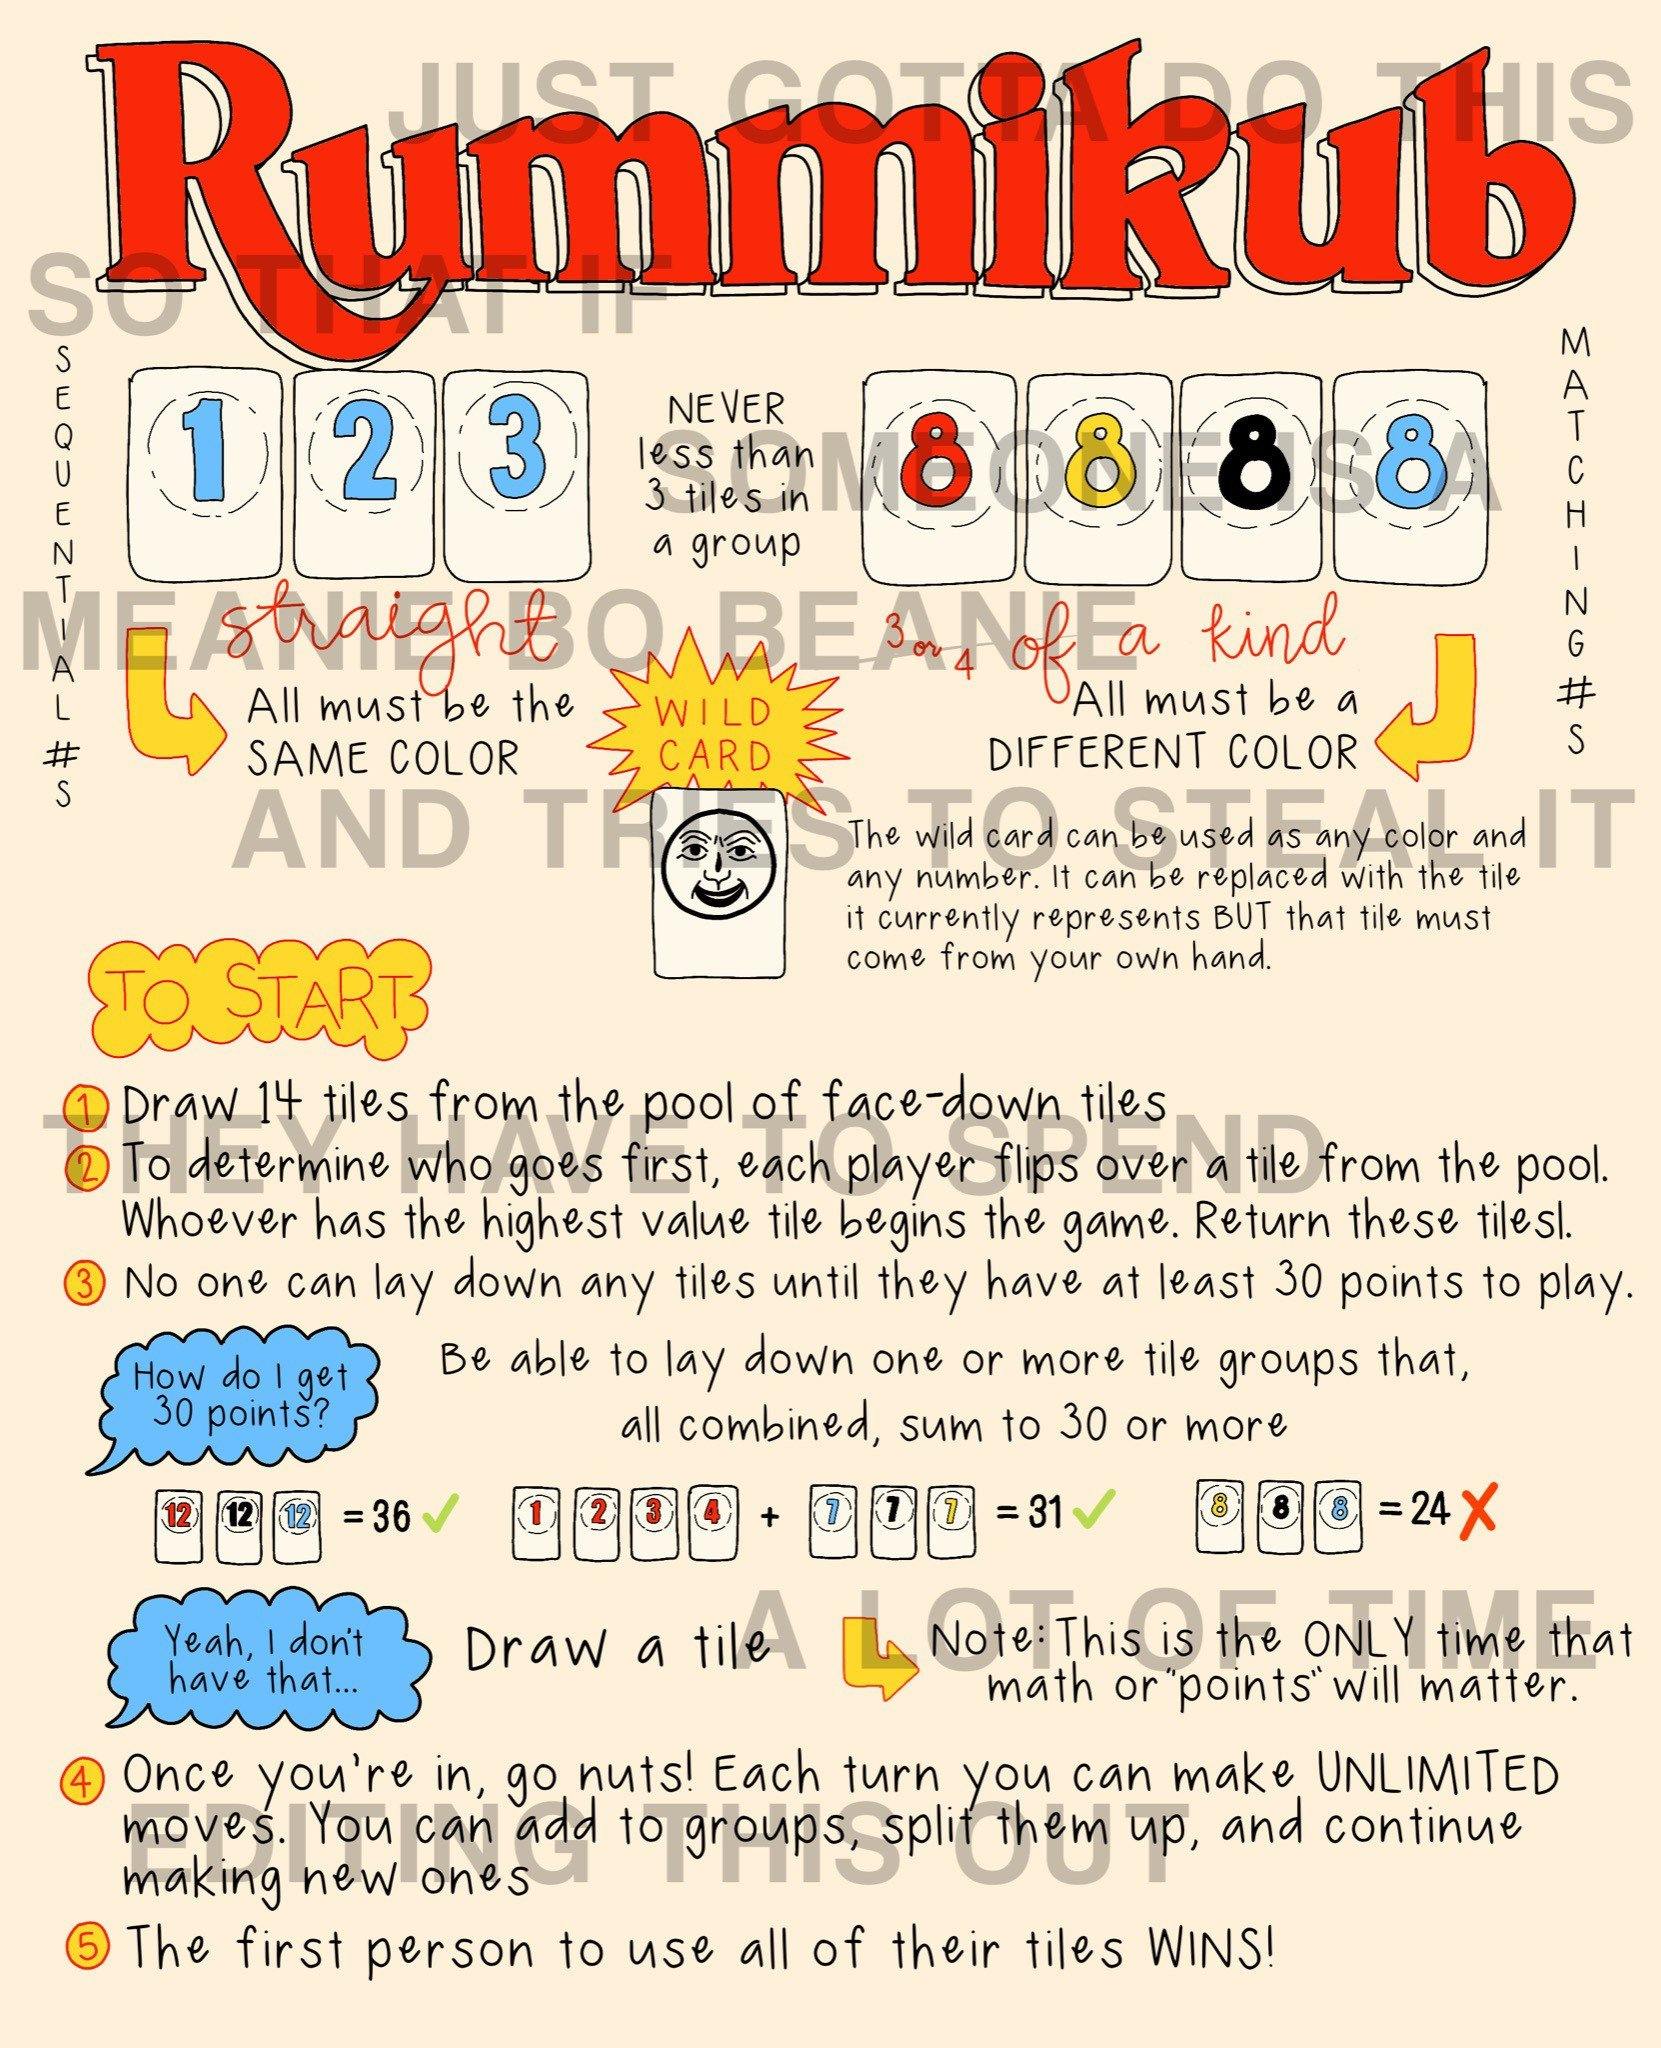 Rummikub Instructions Illustrated Game Guide Digital Download - The Peach Fuzz